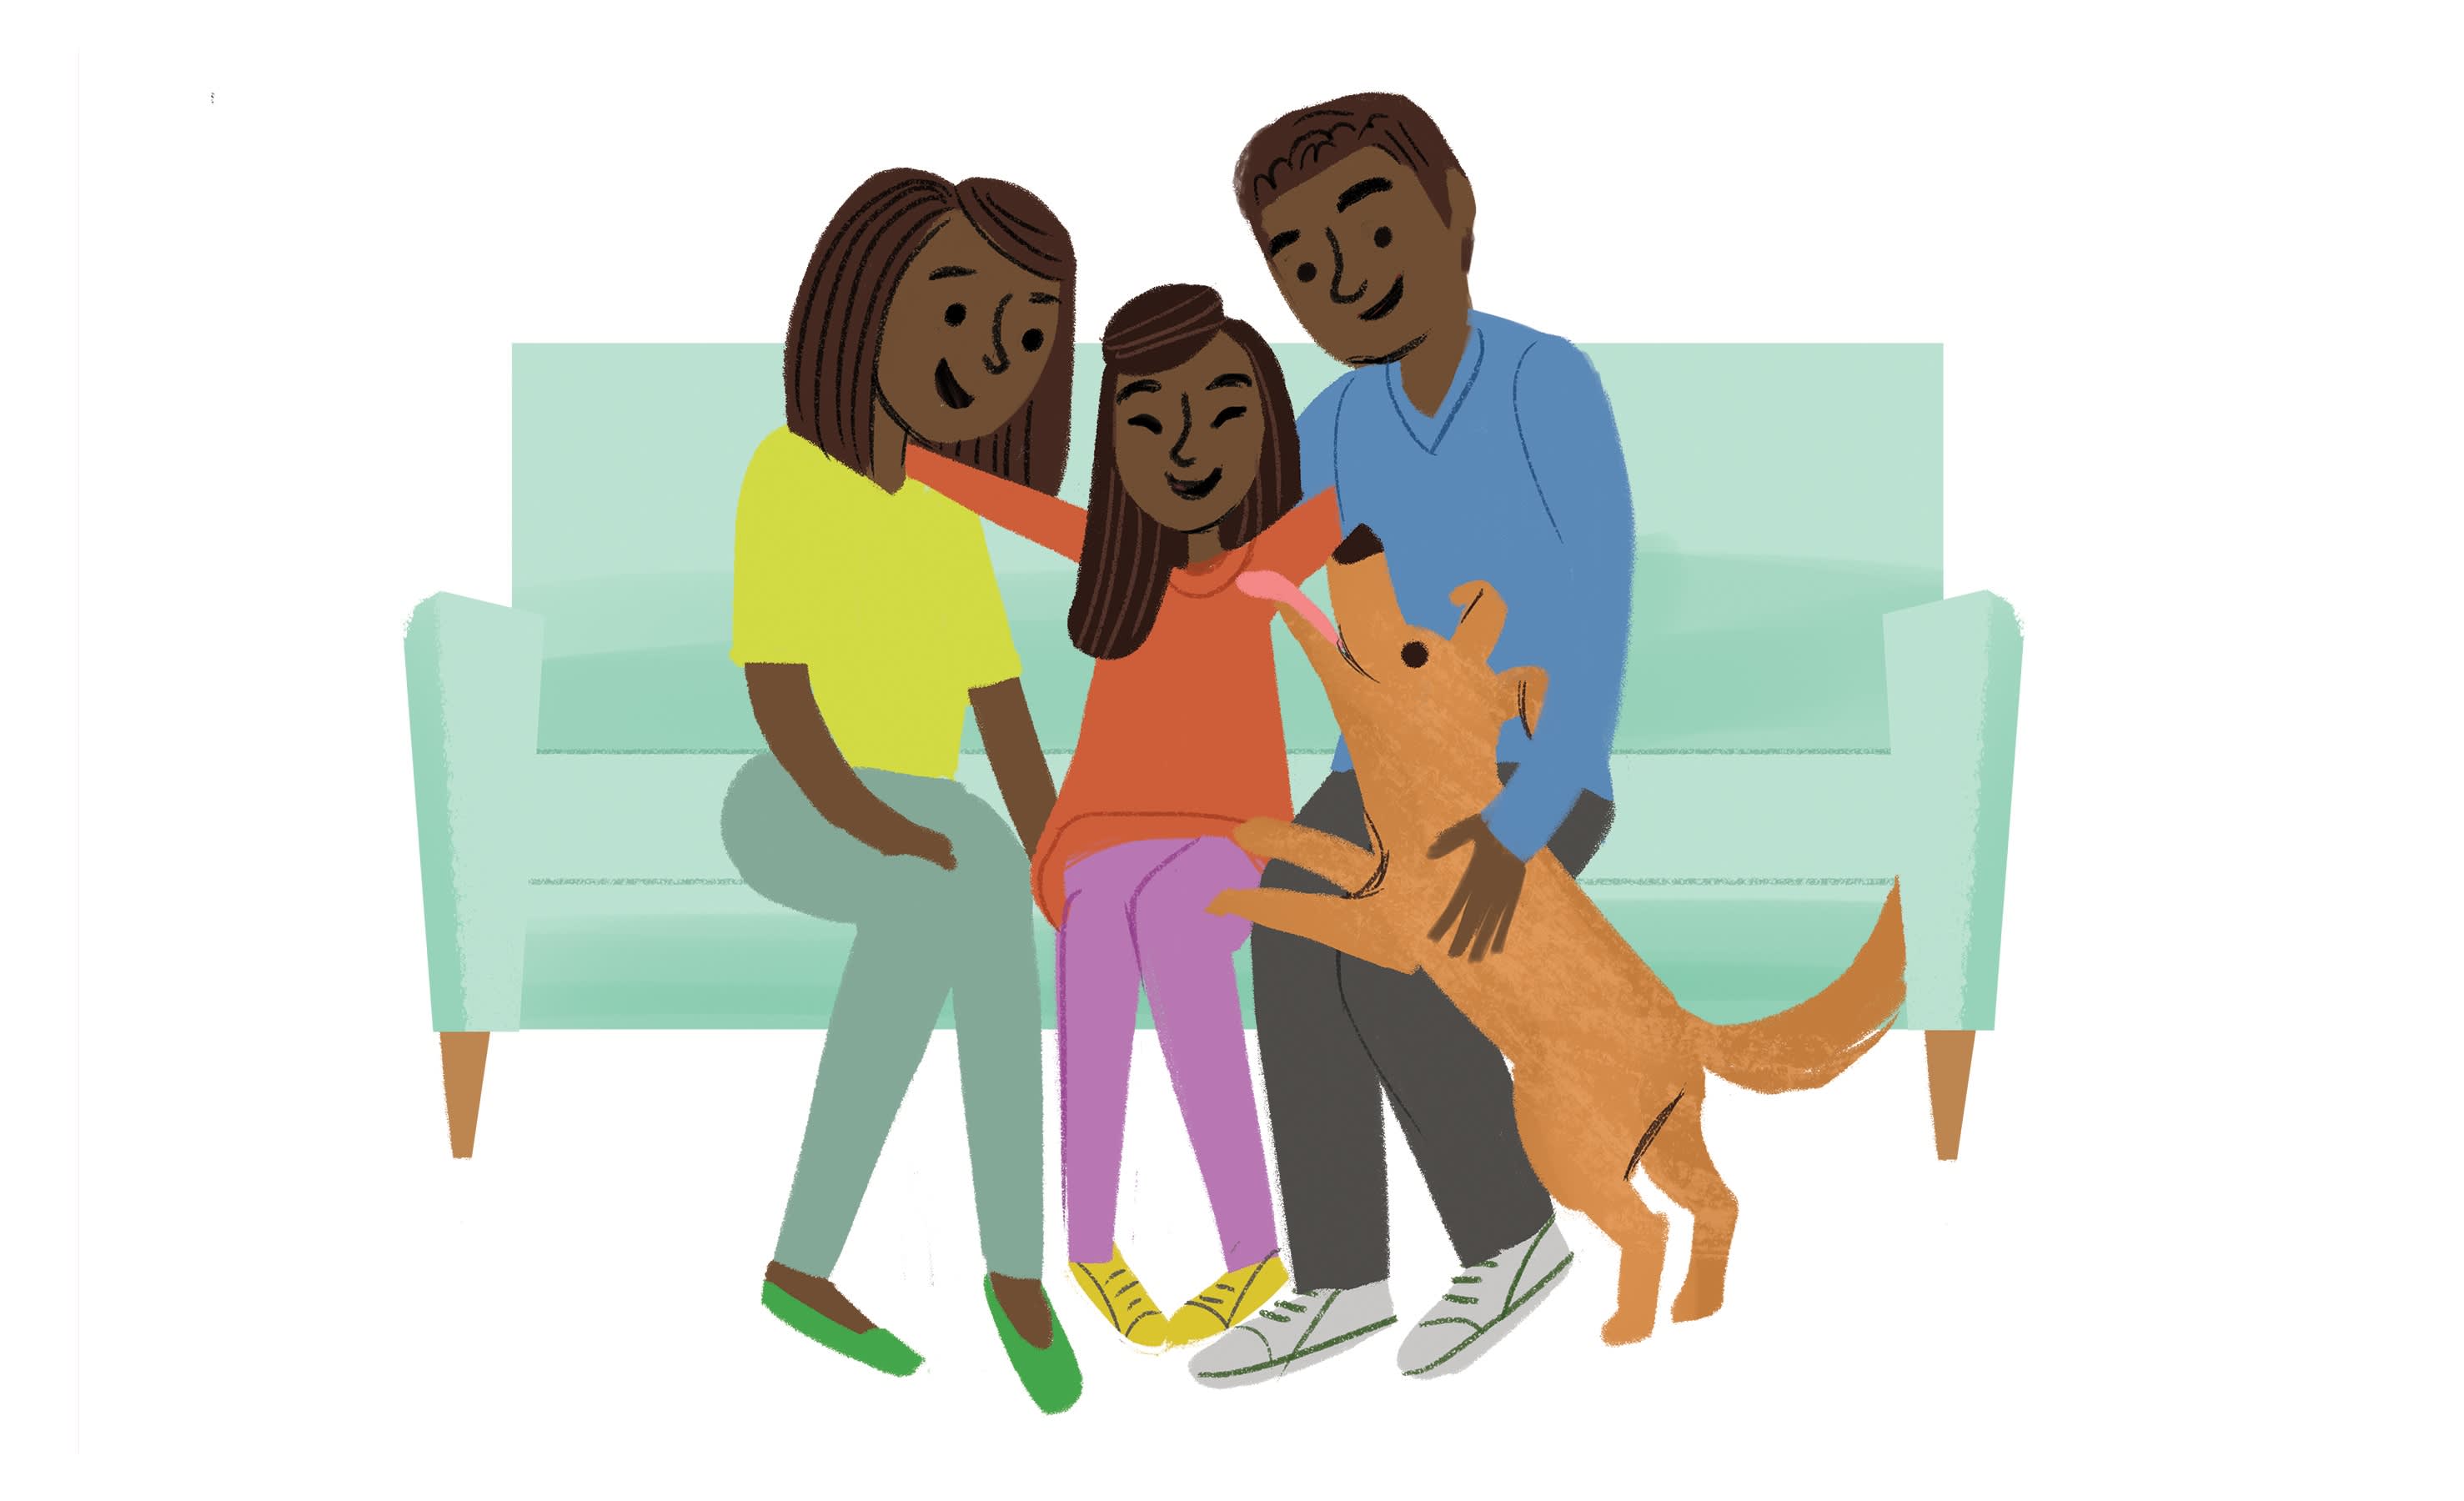 Family sitting together on a couch with their dog